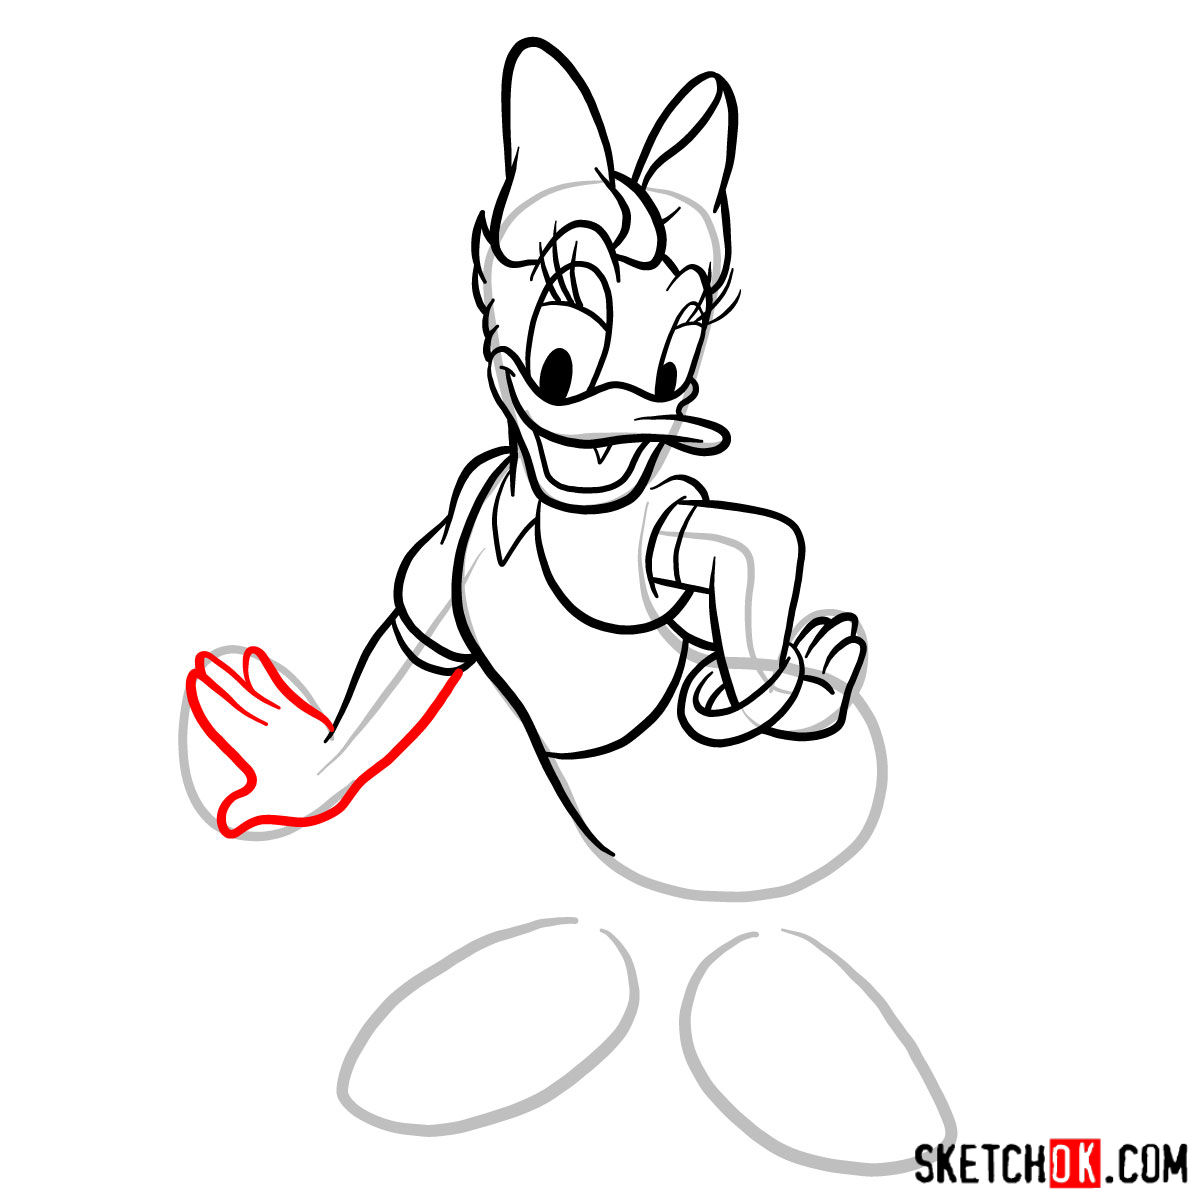 How to draw Daisy Duck - step 09